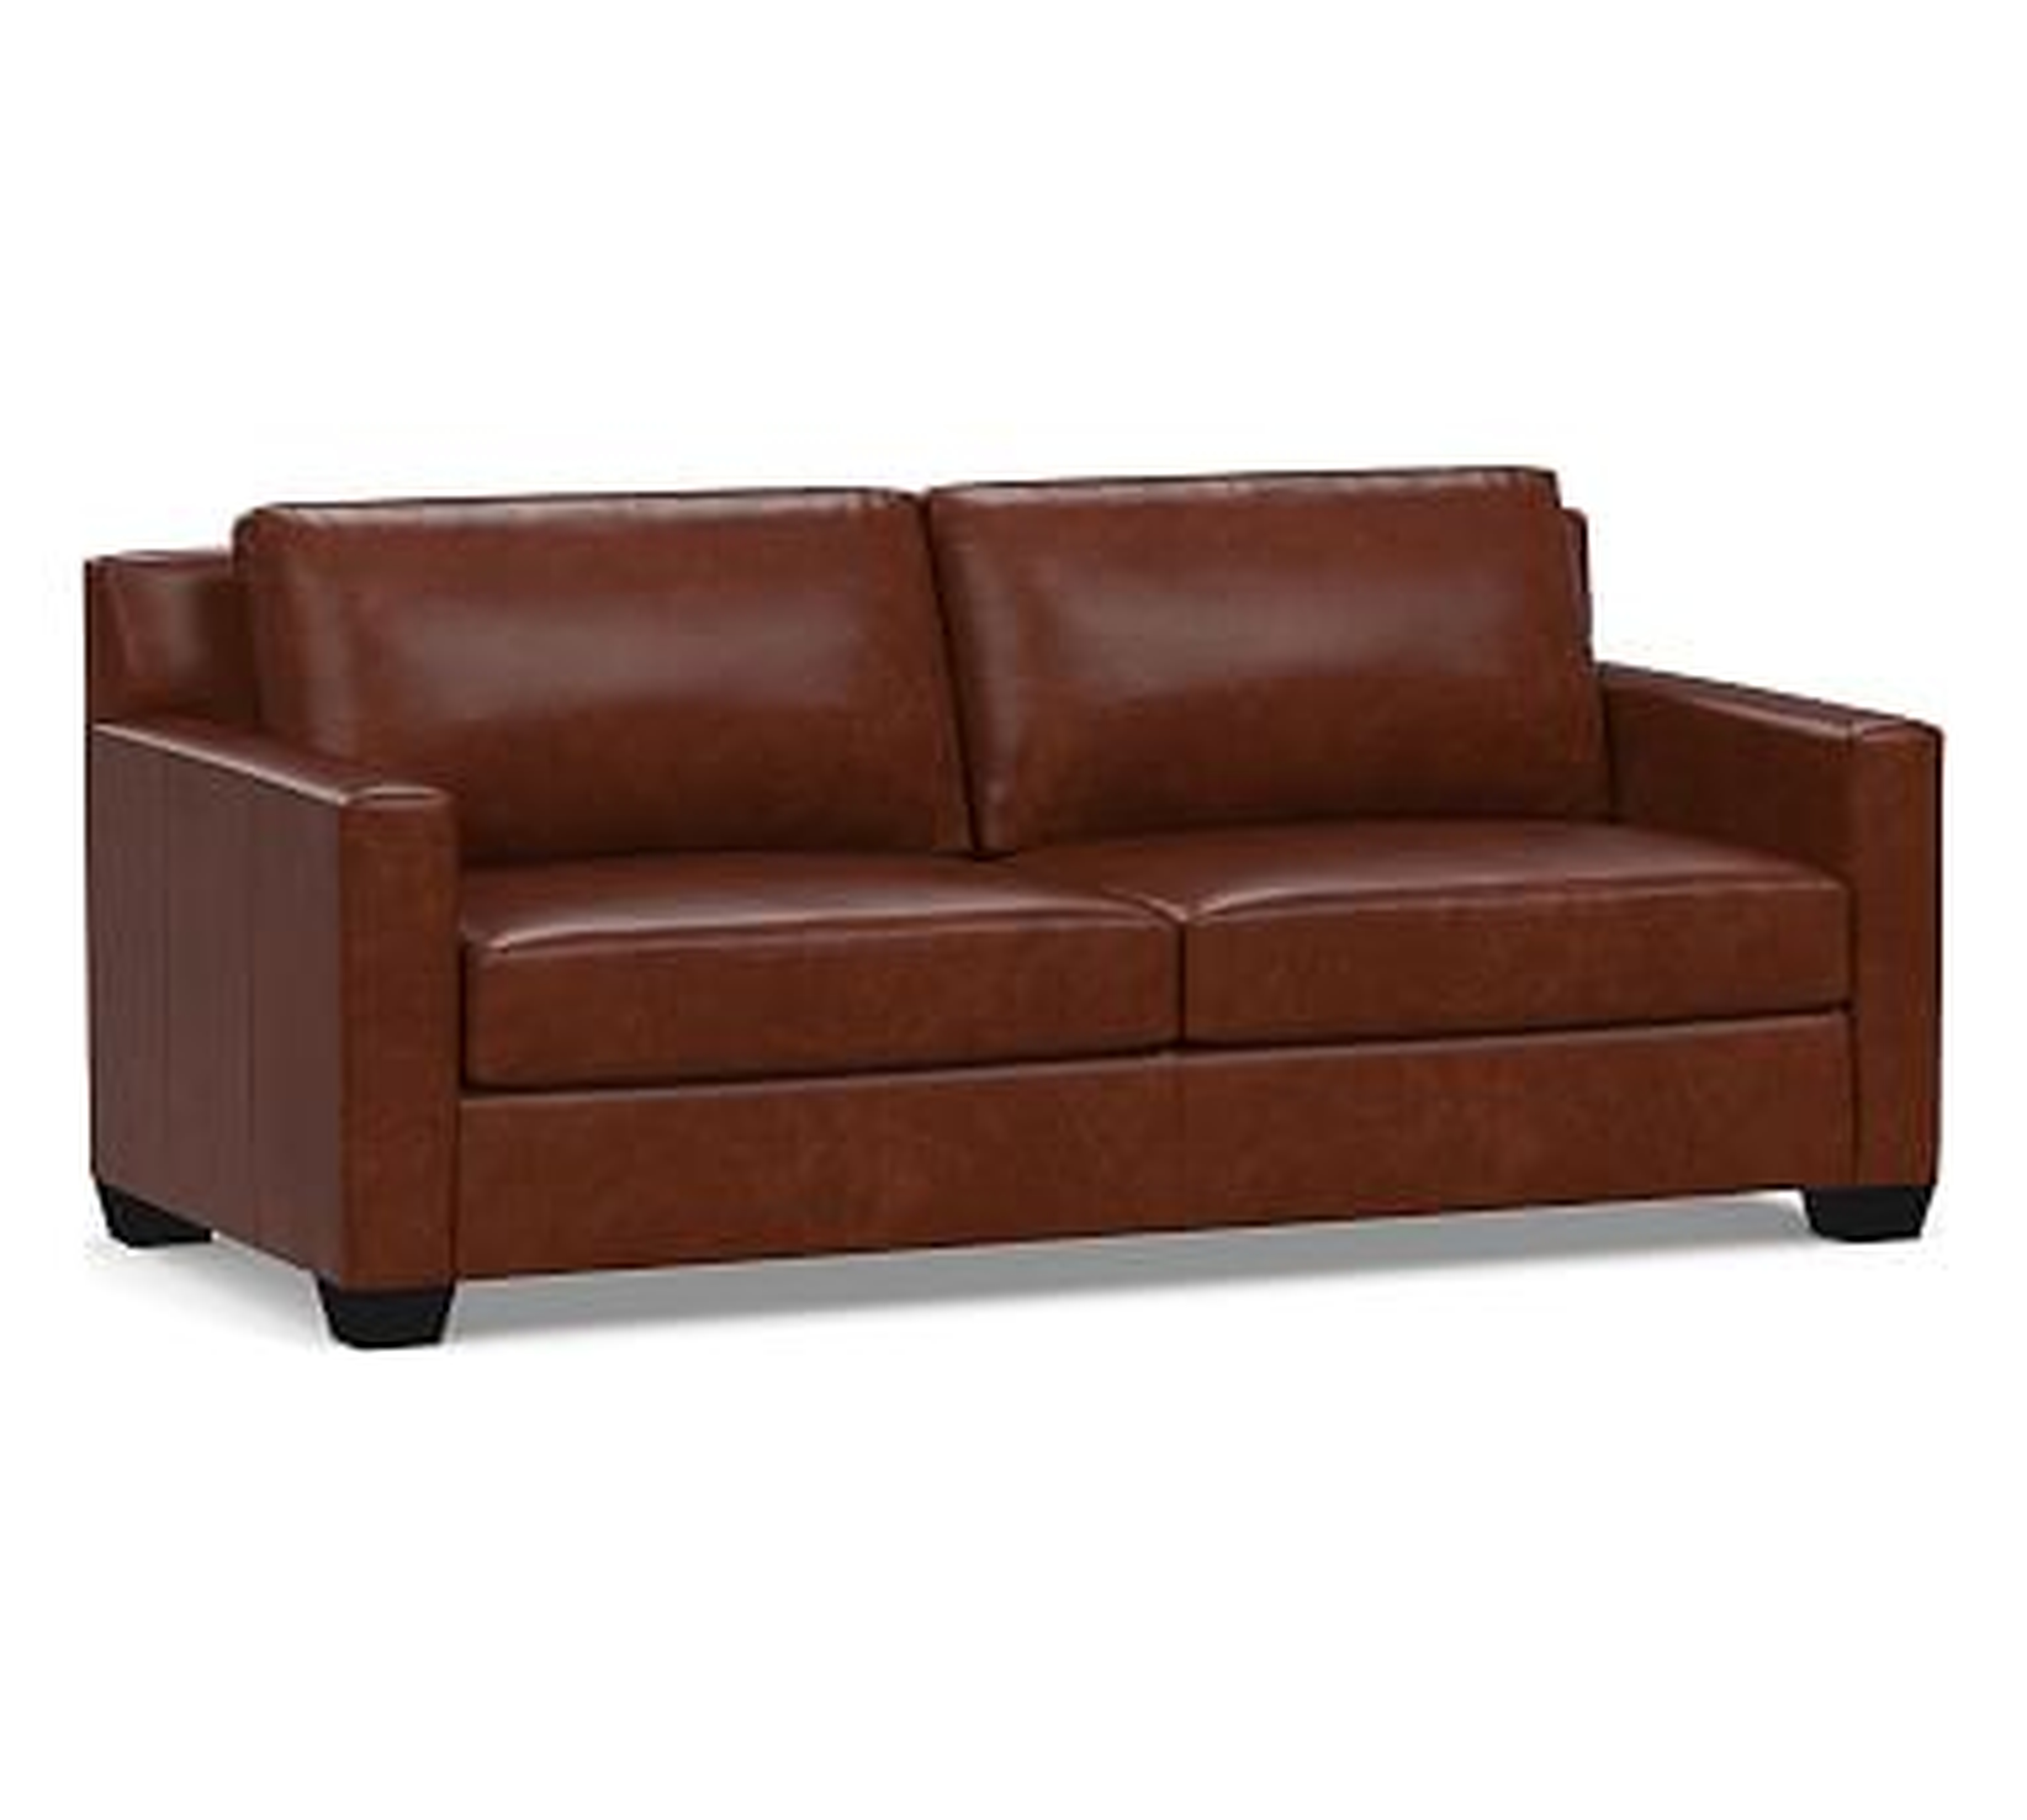 York Square Arm Leather Sofa 80", Polyester Wrapped Cushions, Statesville Molasses - Pottery Barn